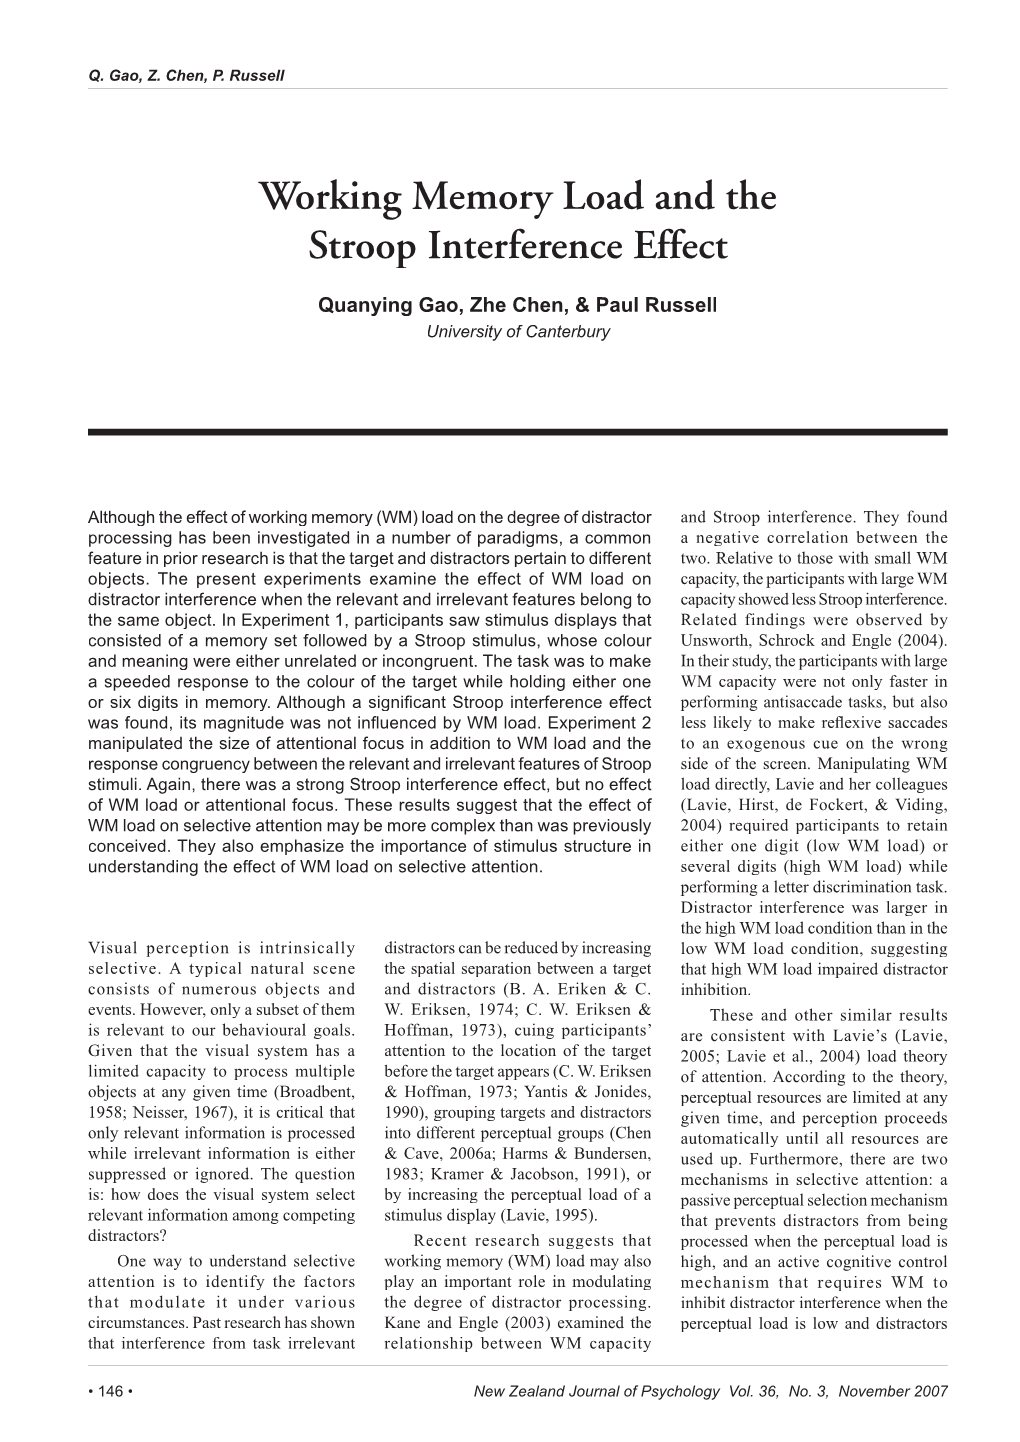 Working Memory Load and the Stroop Interference Effect